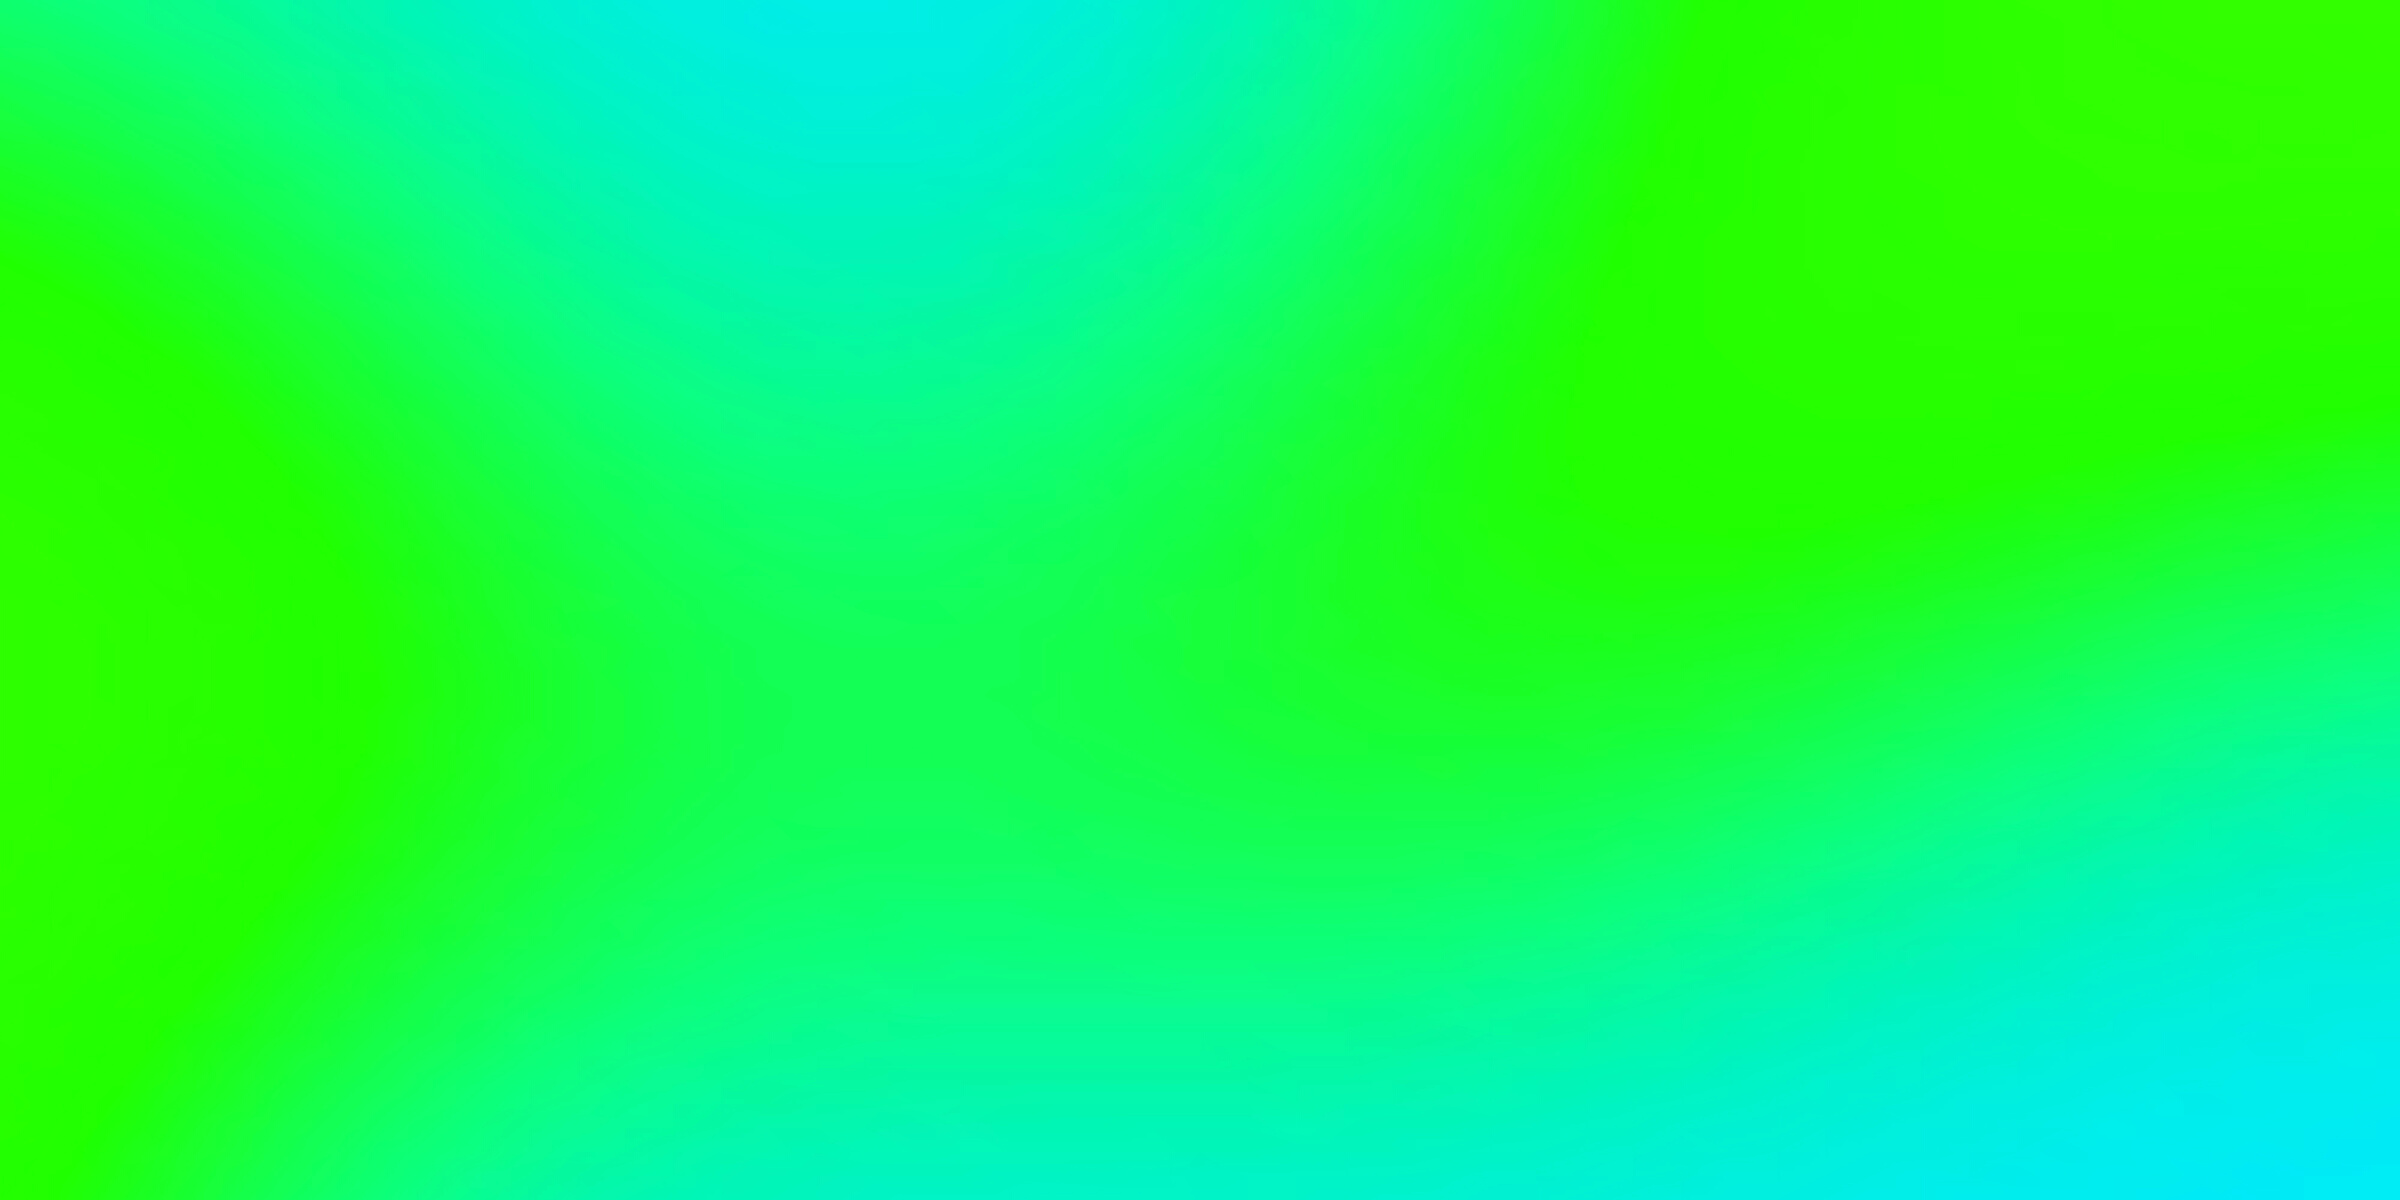 Blue And Green Blurry Gradient Background